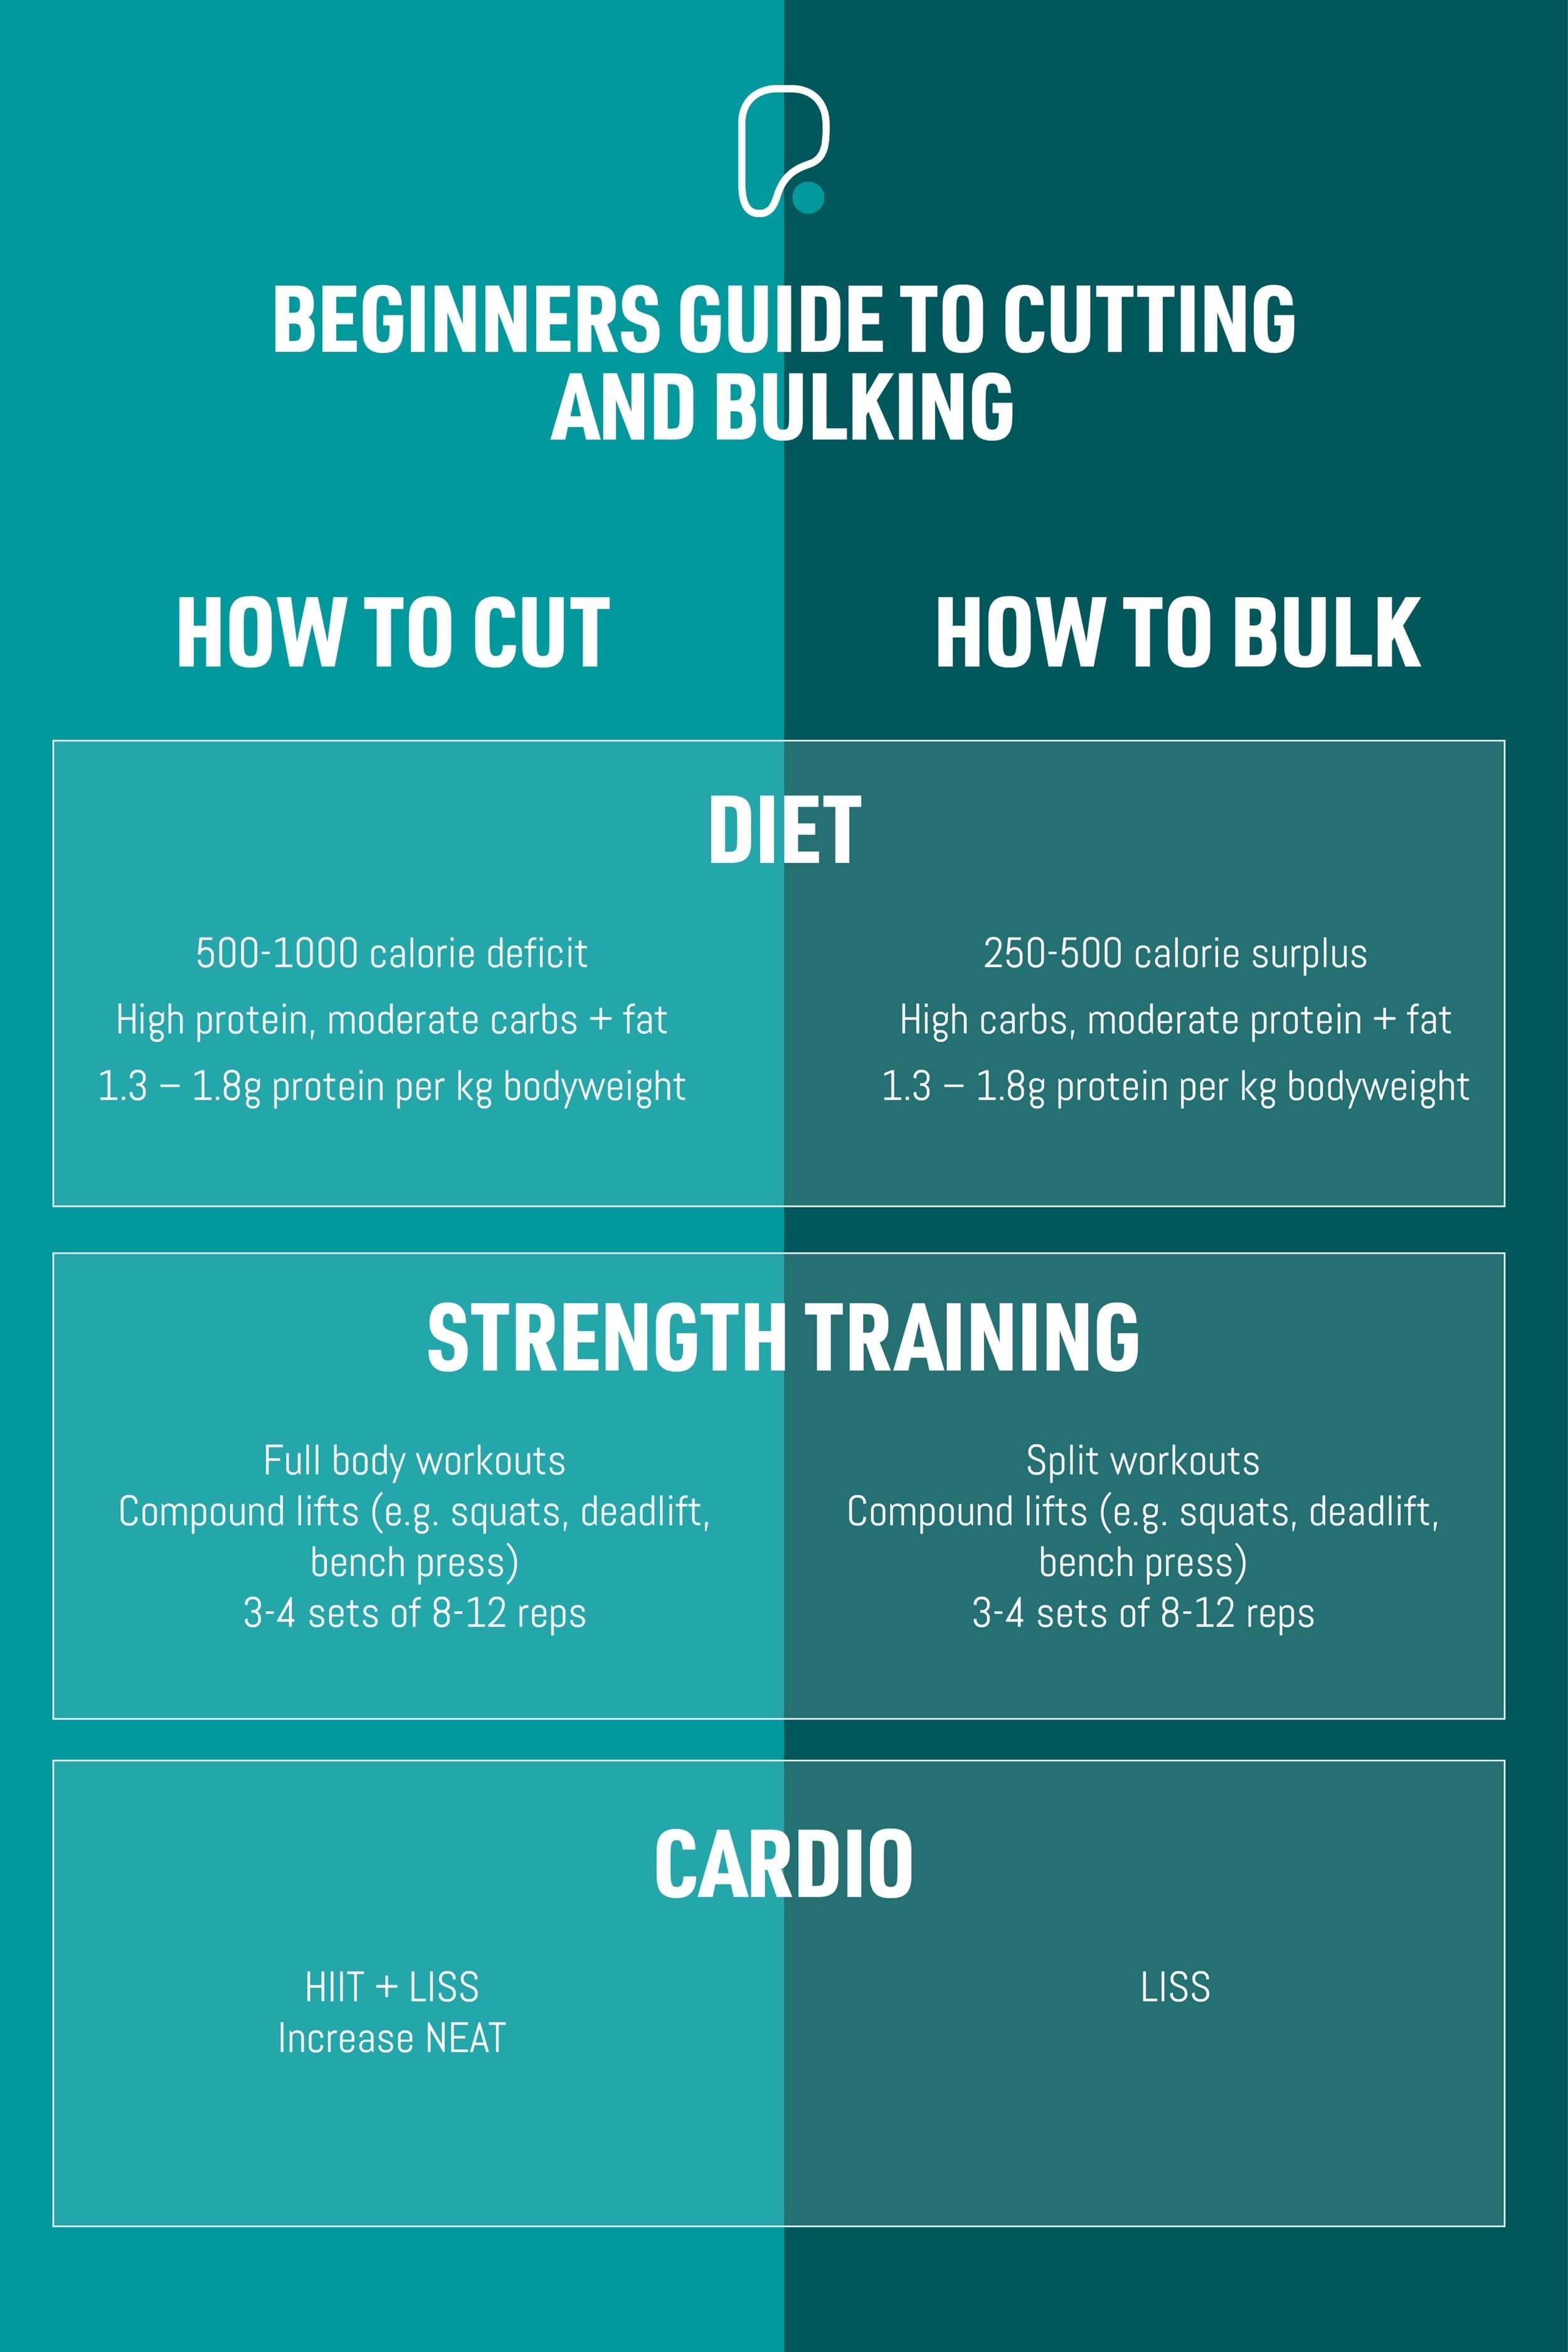 How To Bulk And Cut